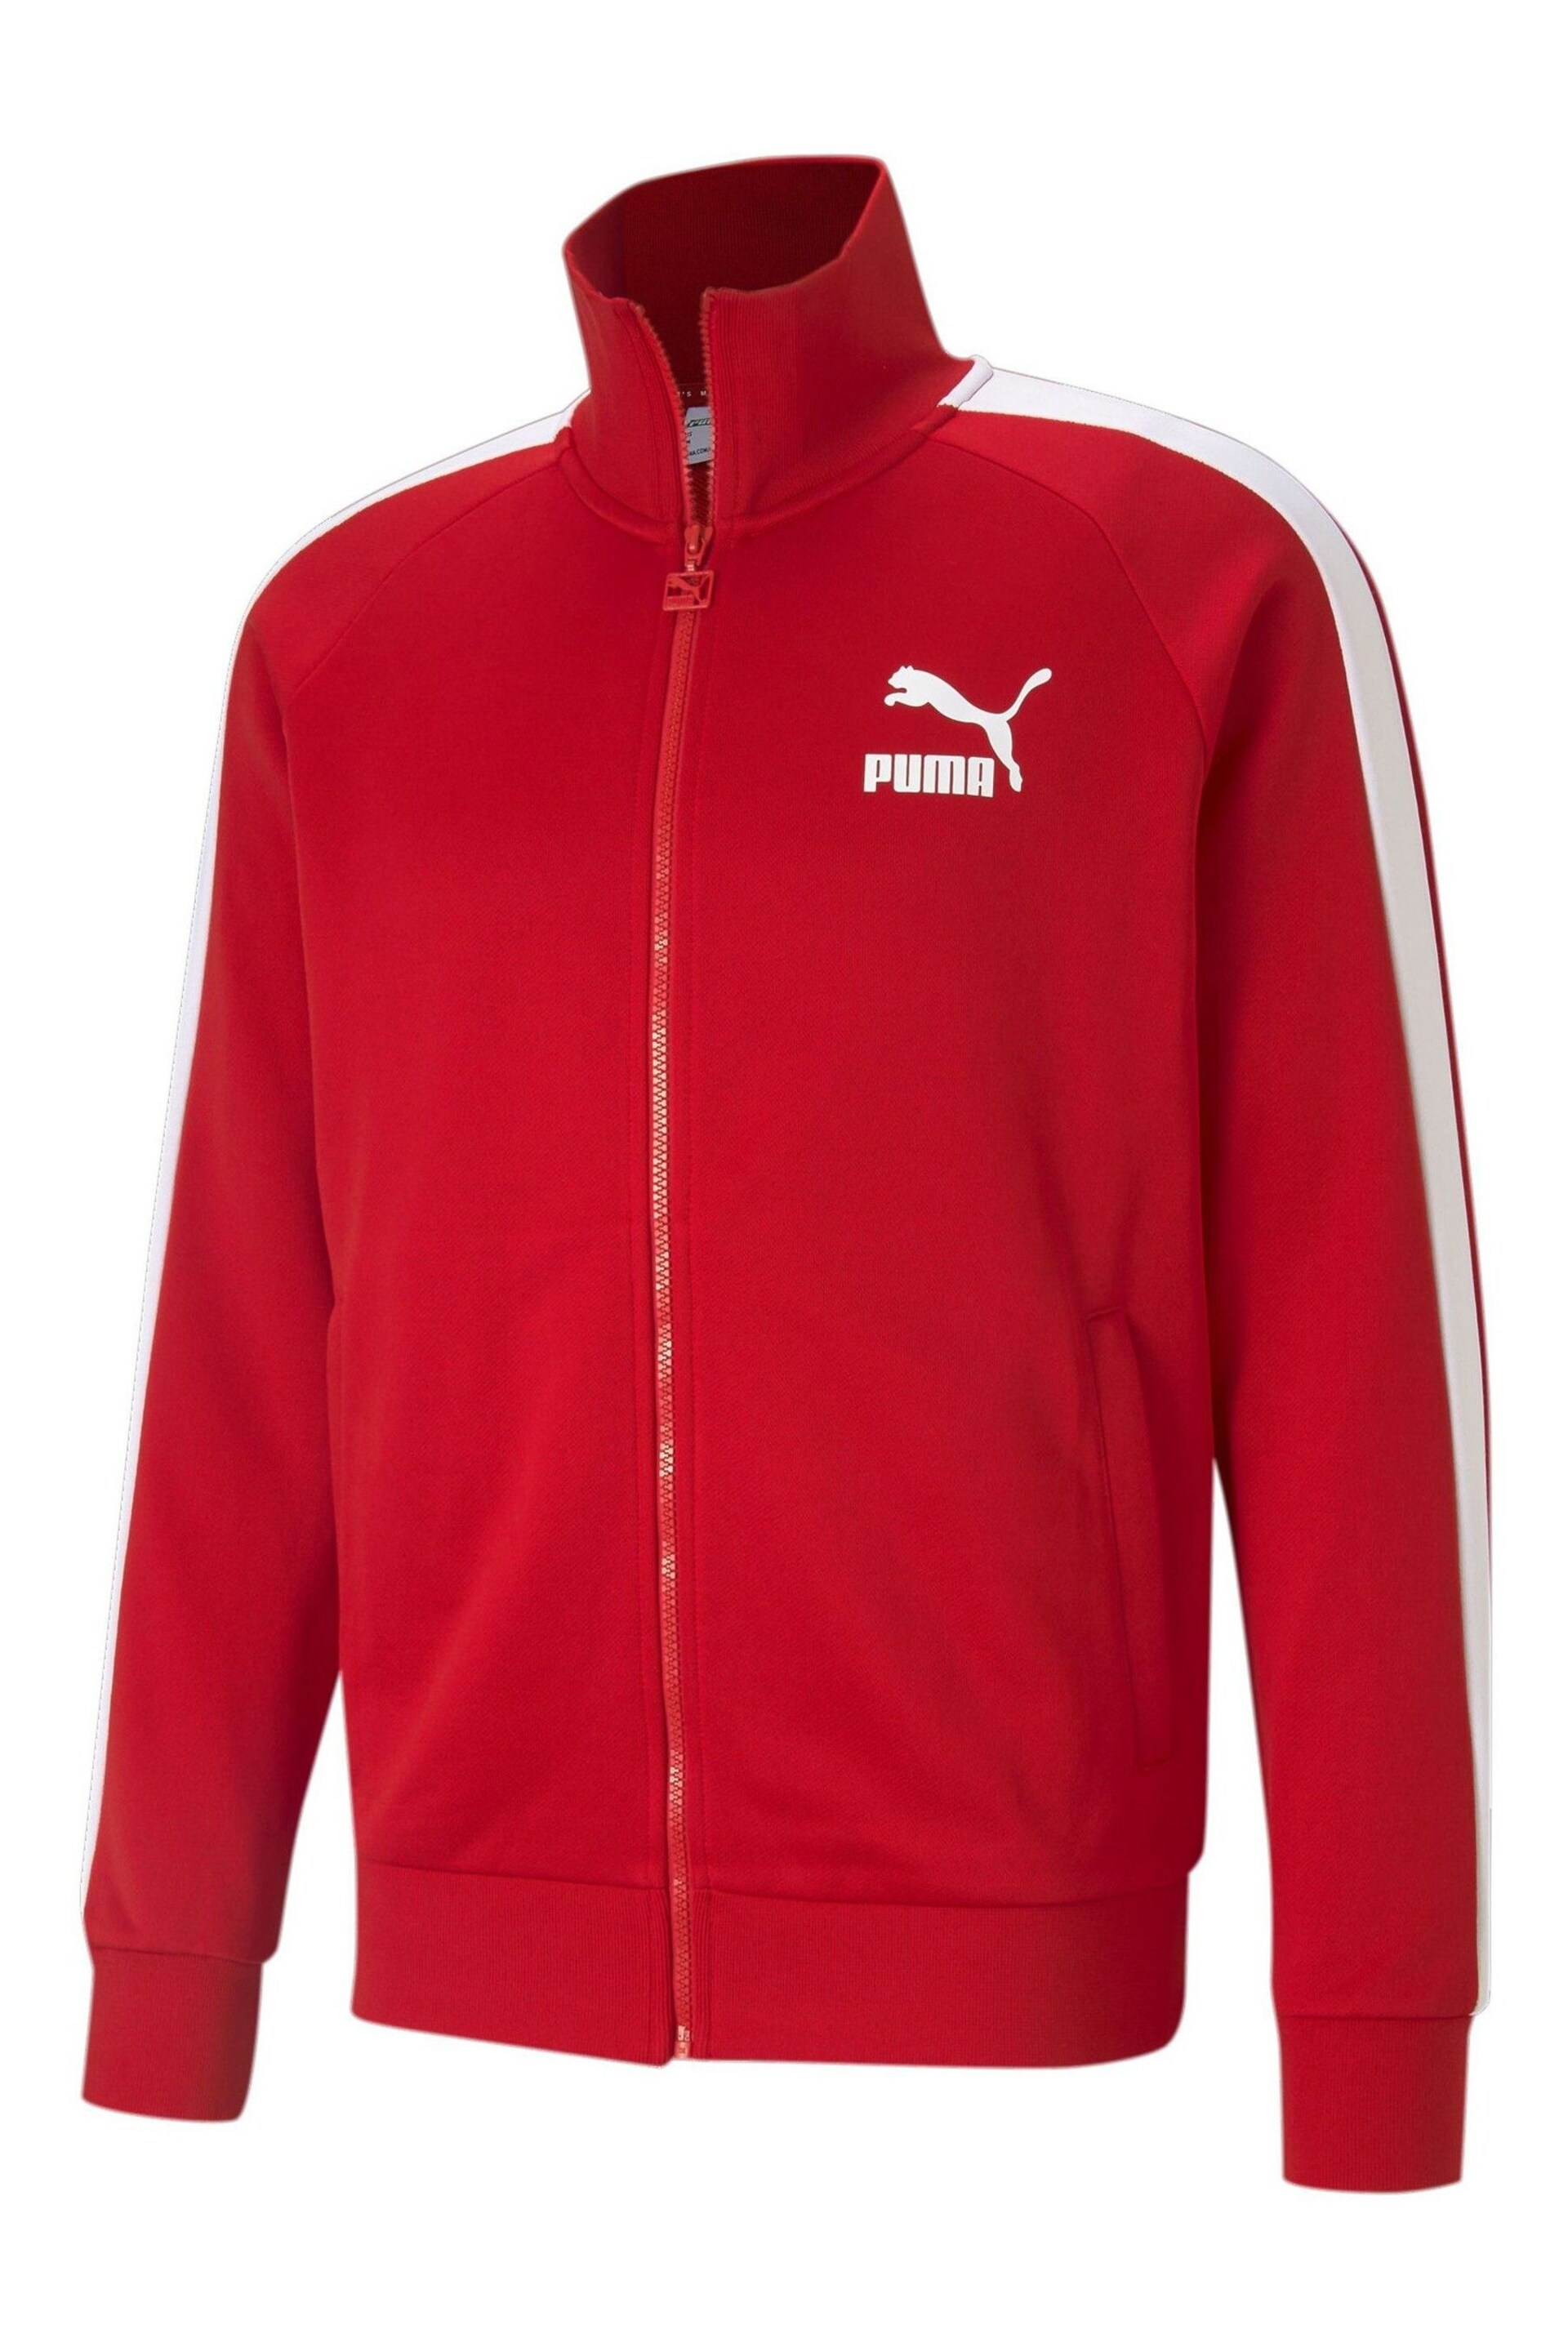 Puma Red Iconic T7 Mens Track Jacket - Image 4 of 5